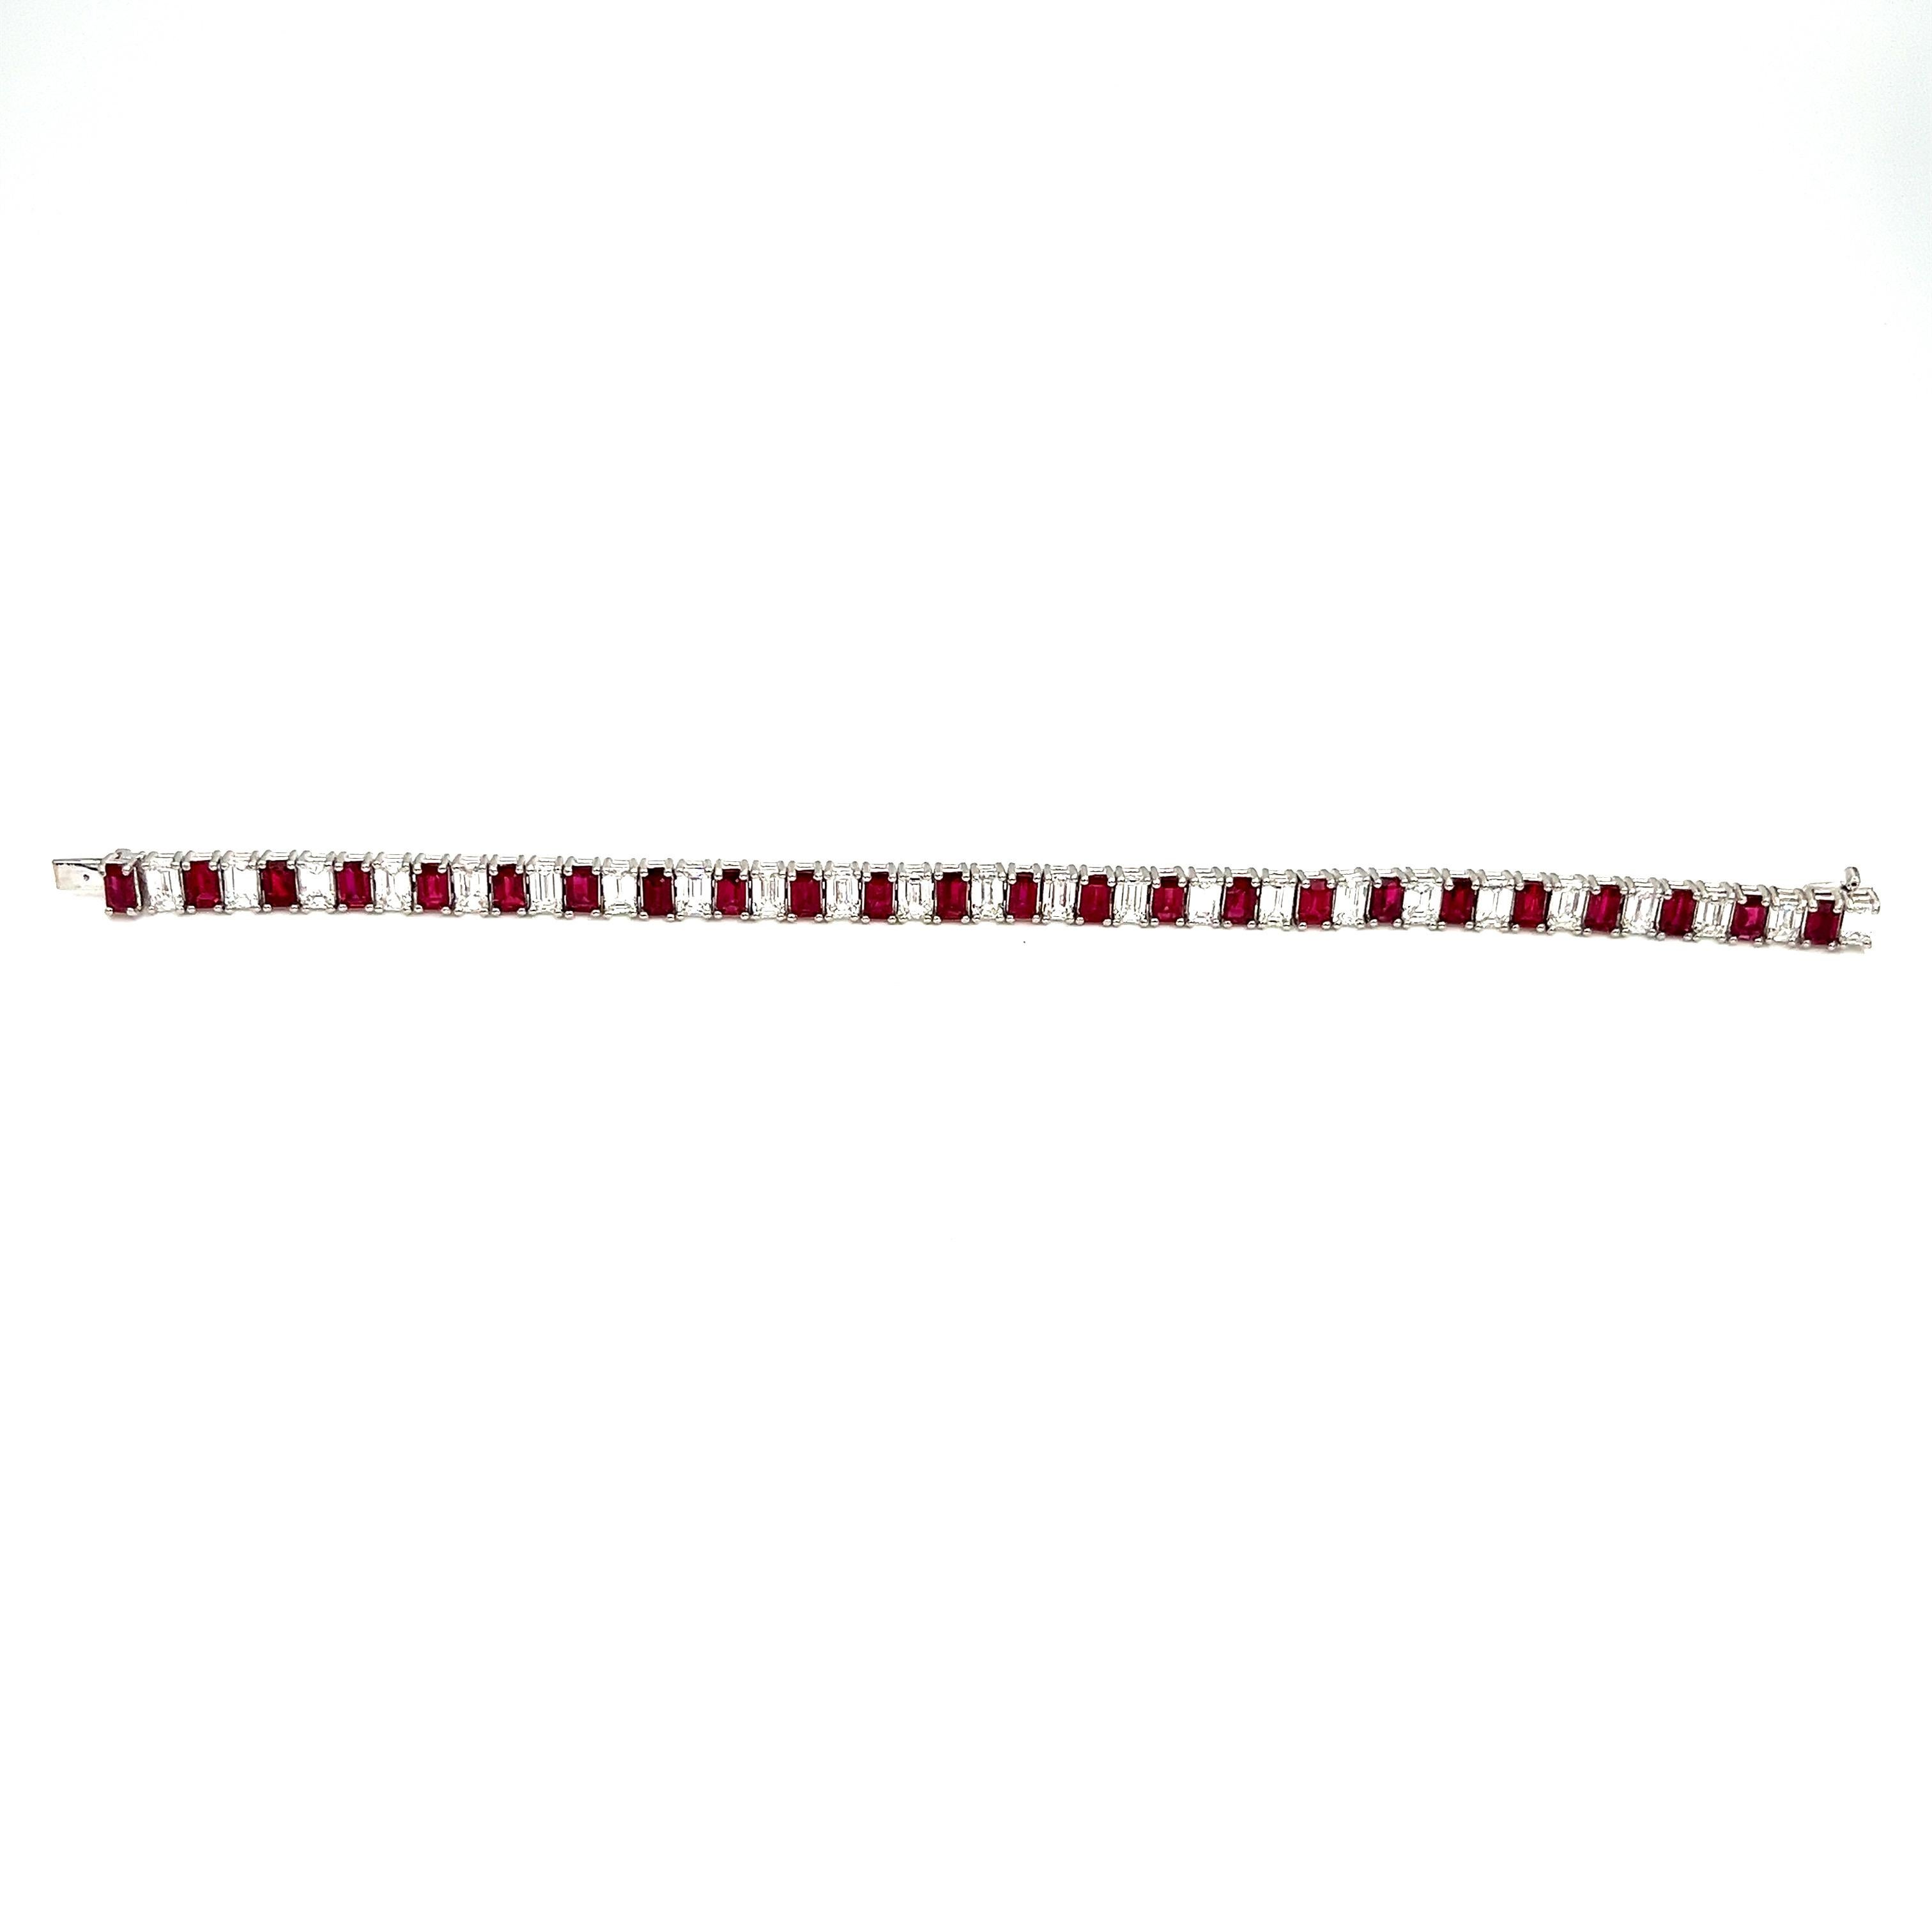 This bracelet features 24 emerald-cut natural rubies weighing 9.29 ct and 24 baguette shape diamonds weighing 8.00 ct set in platinum. A must have for any fashionista!!